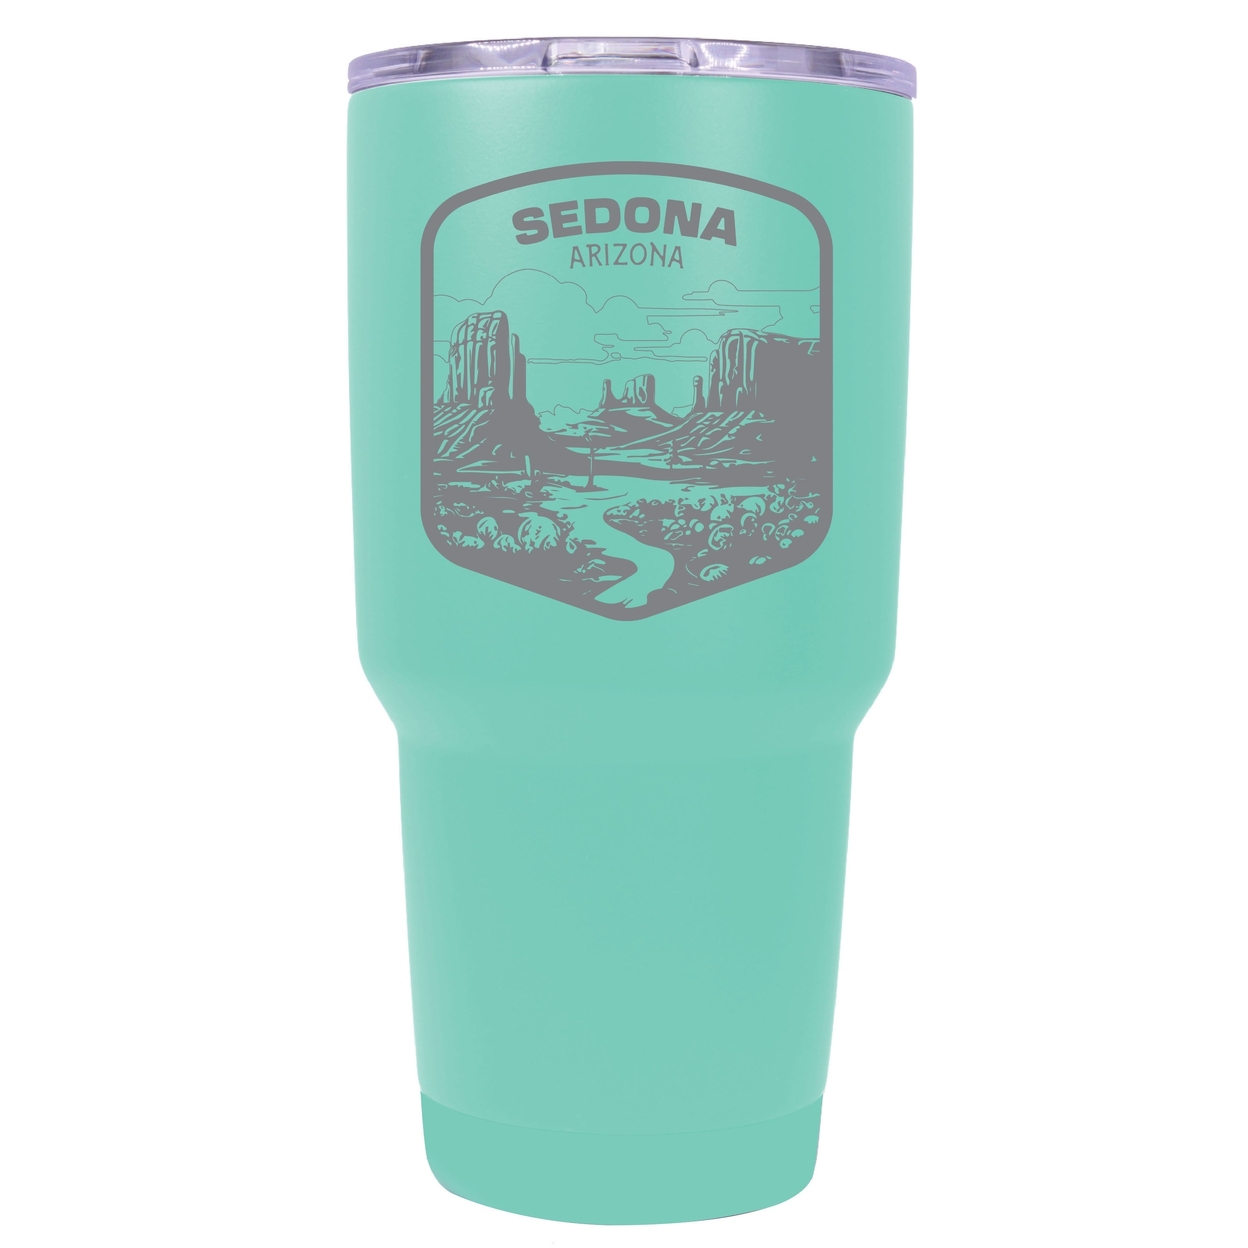 Sedona Arizona Souvenir 24 Oz Engraved Insulated Stainless Steel Tumbler - Red,,4-Pack